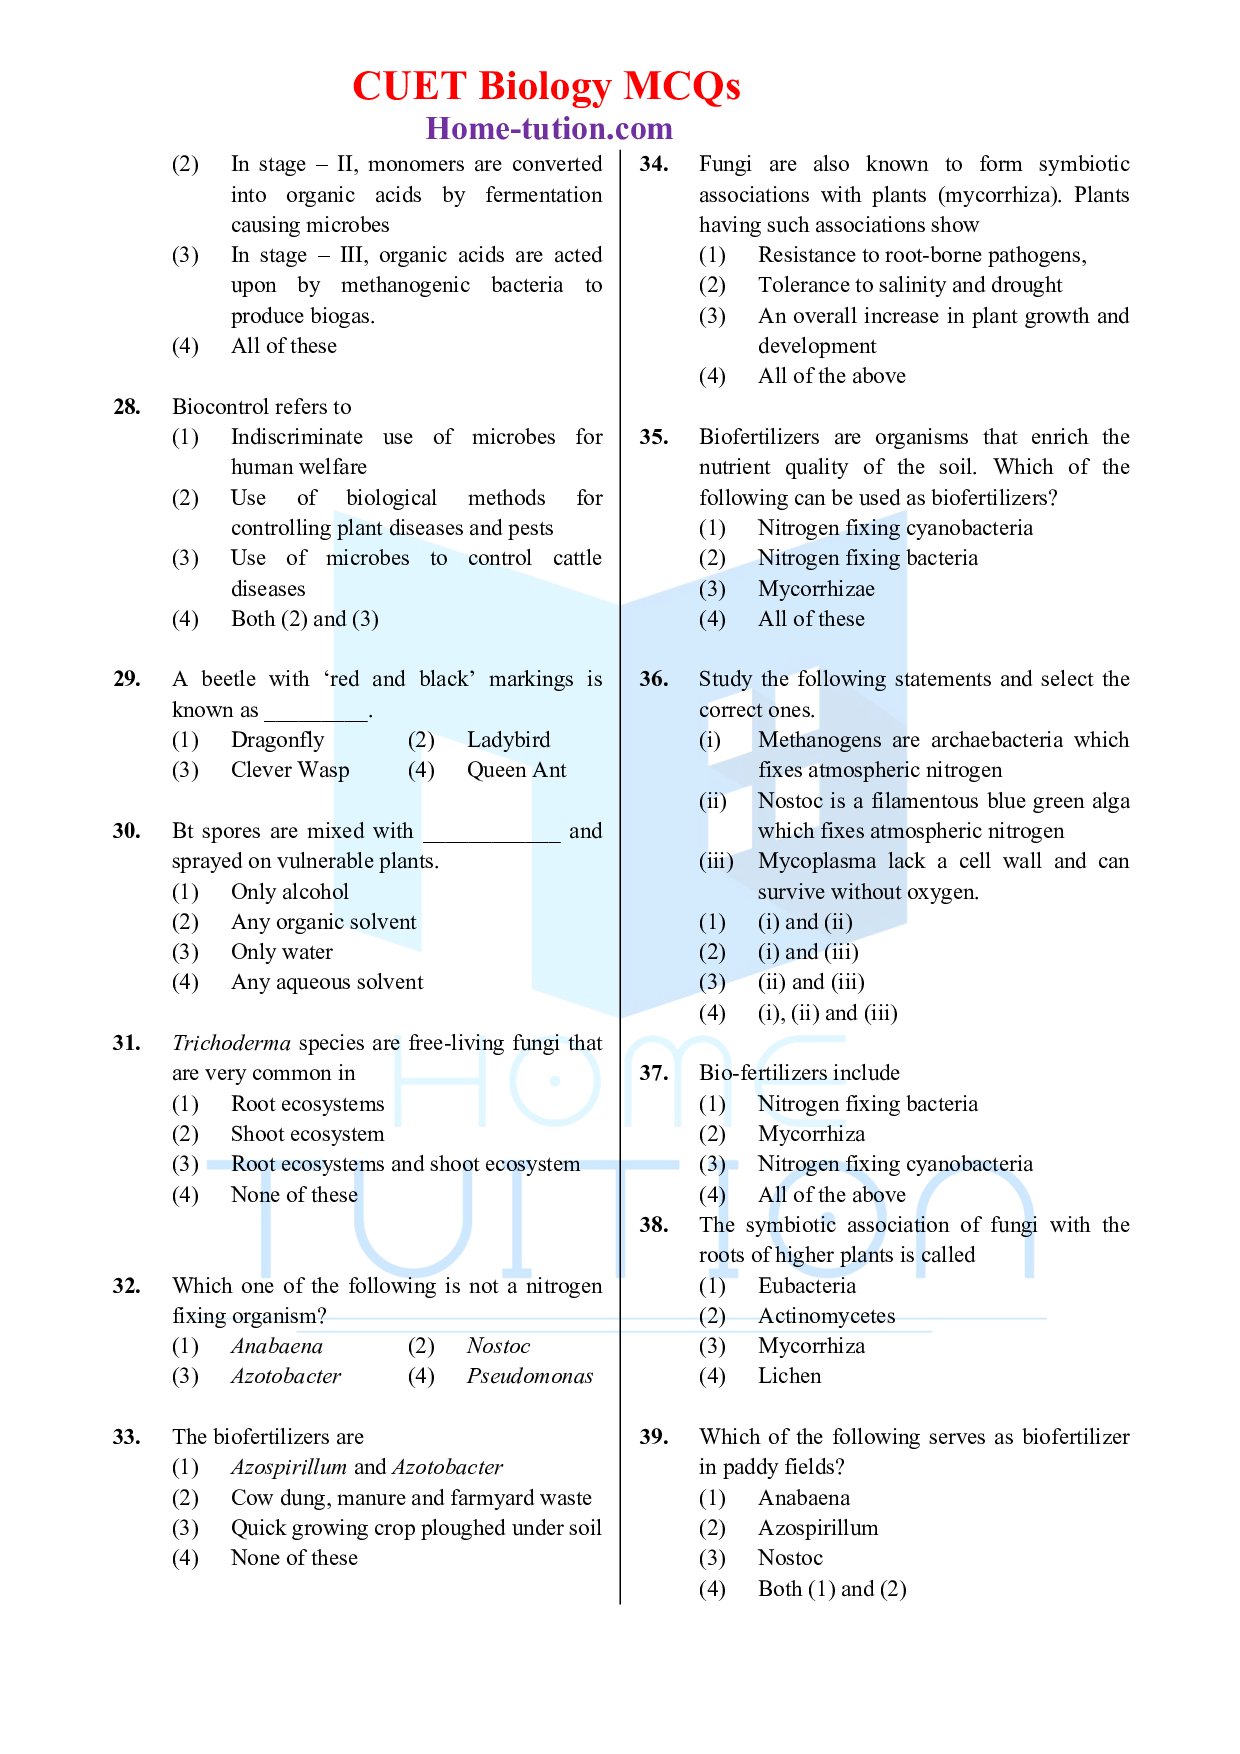 Biology MCQ Questions for CUET Chapter 10 Microbes in Human Welfare